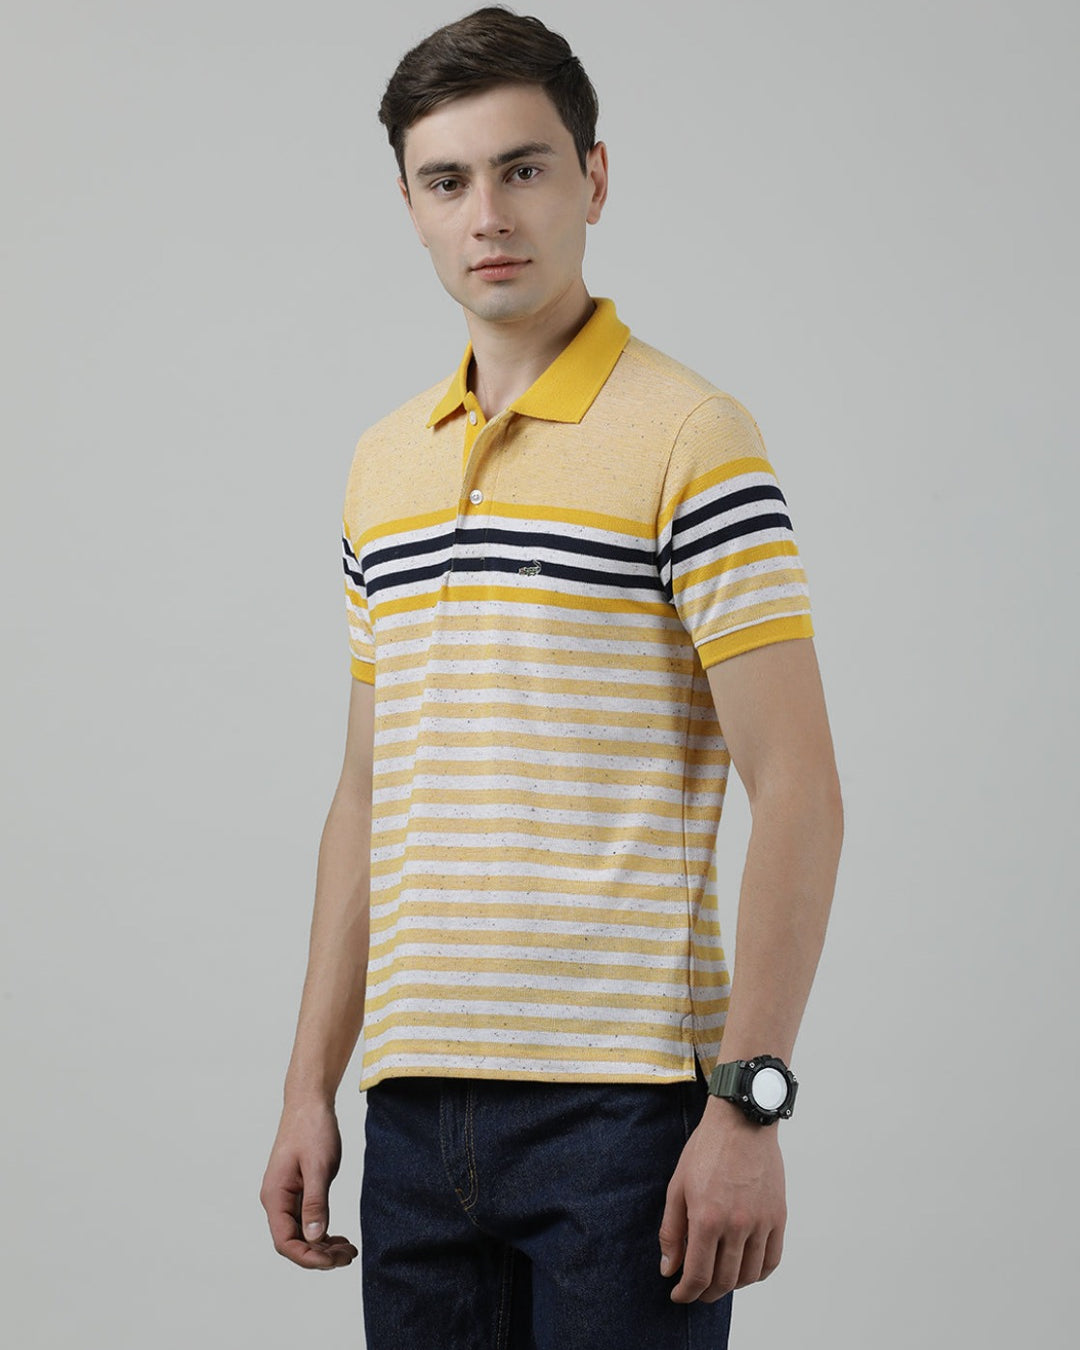 Casual Yellow T-Shirt Engineering Stripes Half Sleeve Slim Fit with Collar for Men